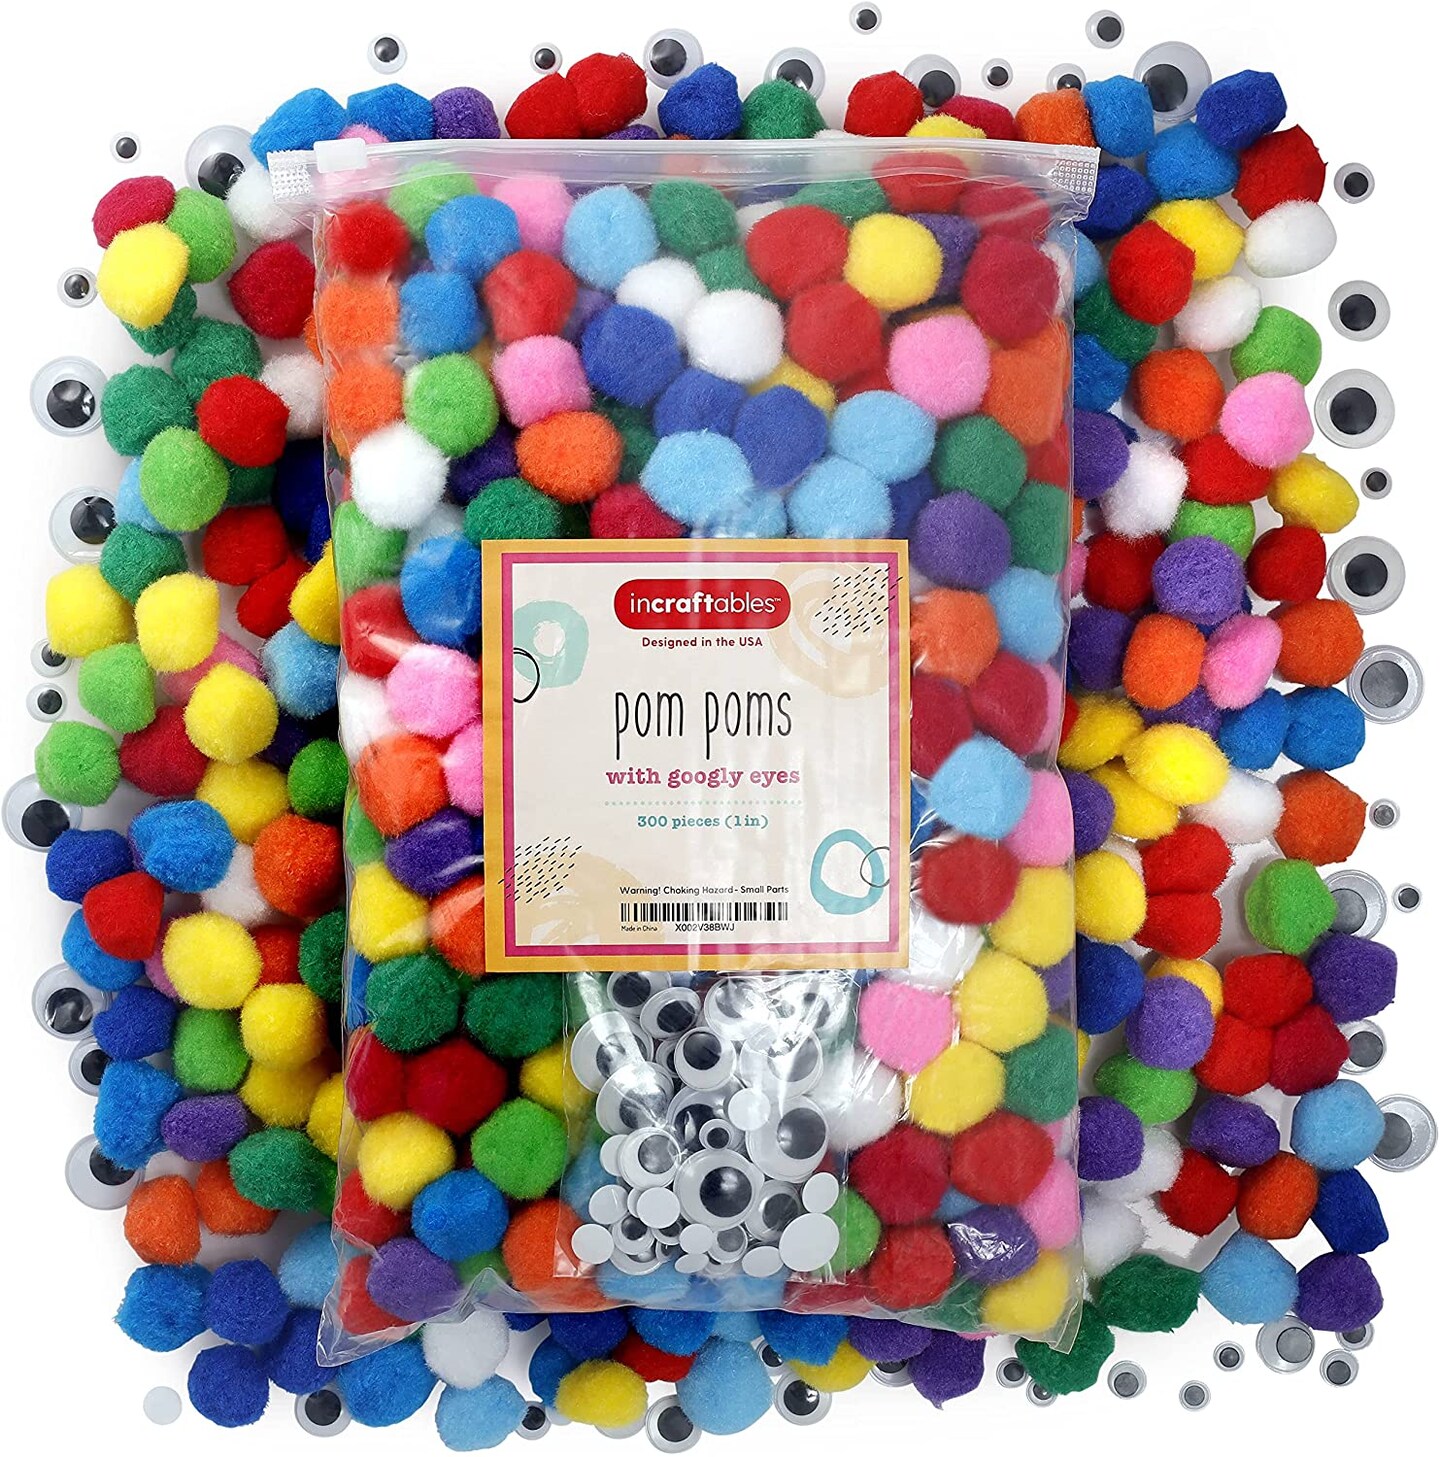 Incraftables 300 pcs Pom Poms with Googly Eyes. Best Colored